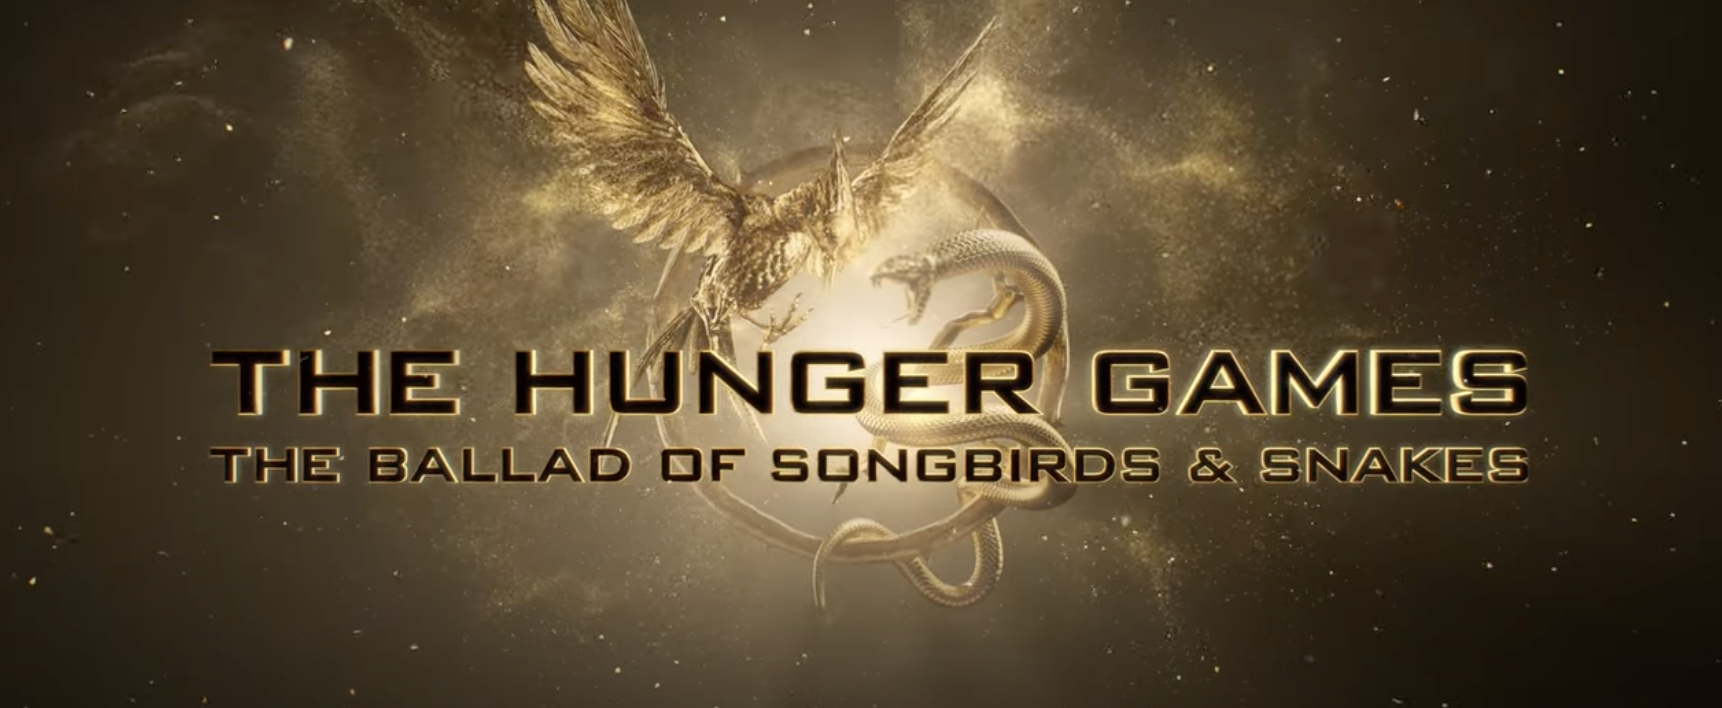 The title card for The Ballad of Songbirds and Snakes